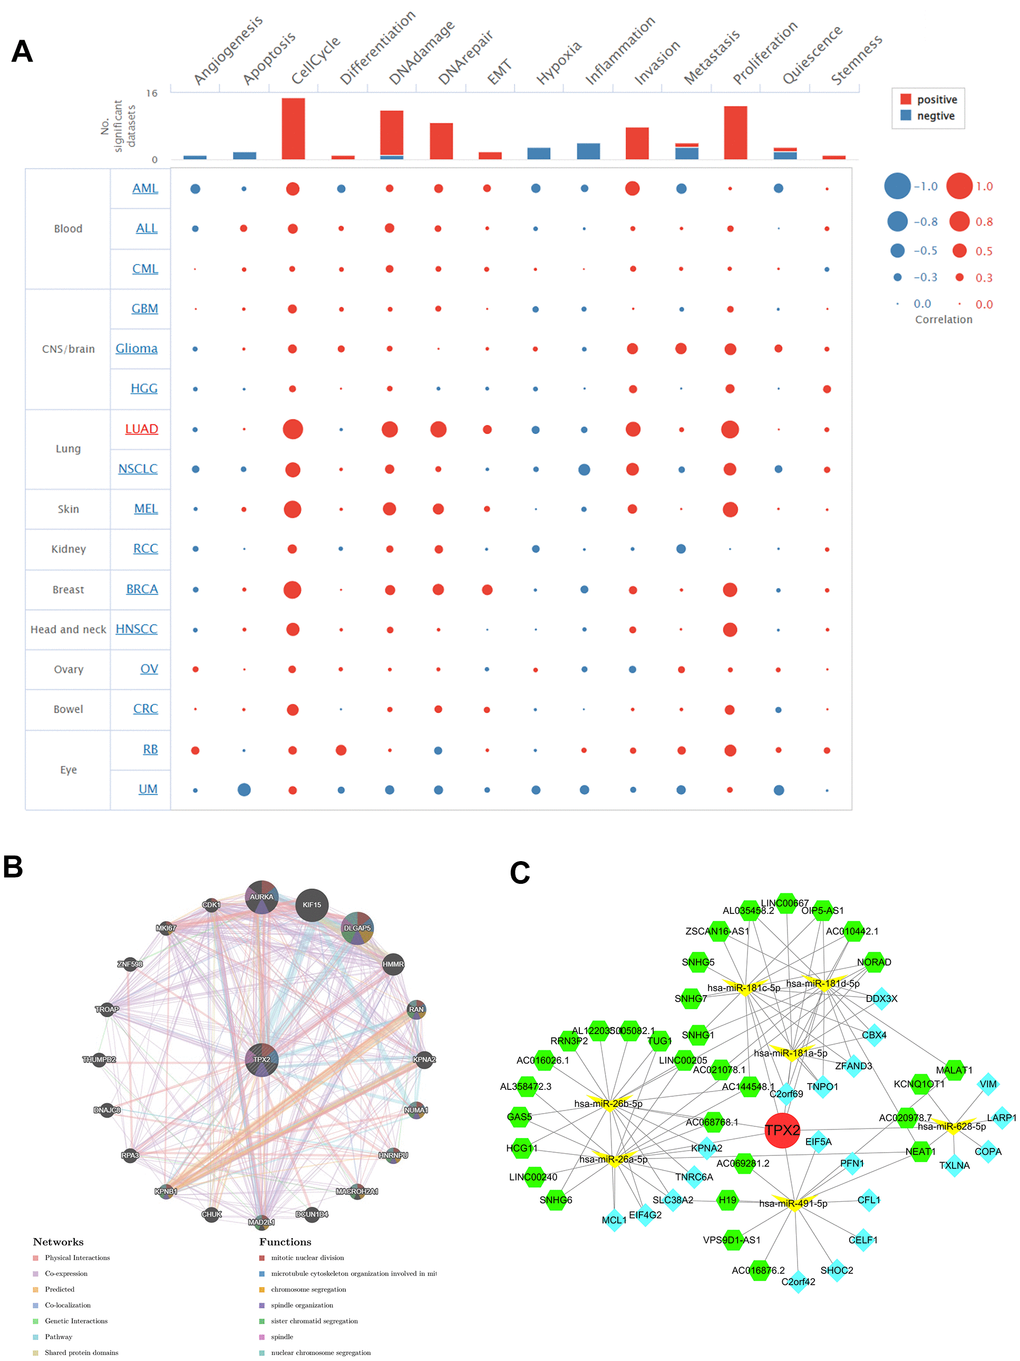 (A) Single-cell functional analysis of TPX2 from the CancerSEA database. (B) A gene-gene interaction network analysis of TPX2 from GeneMANIA database. (C) CeRNA networks of TPX2. Red circle represents the hub gene. Yellow vs represents the miRNAs. Green hexagons represent the lncRNAs. Blue quadrangles represent the circRNAs.